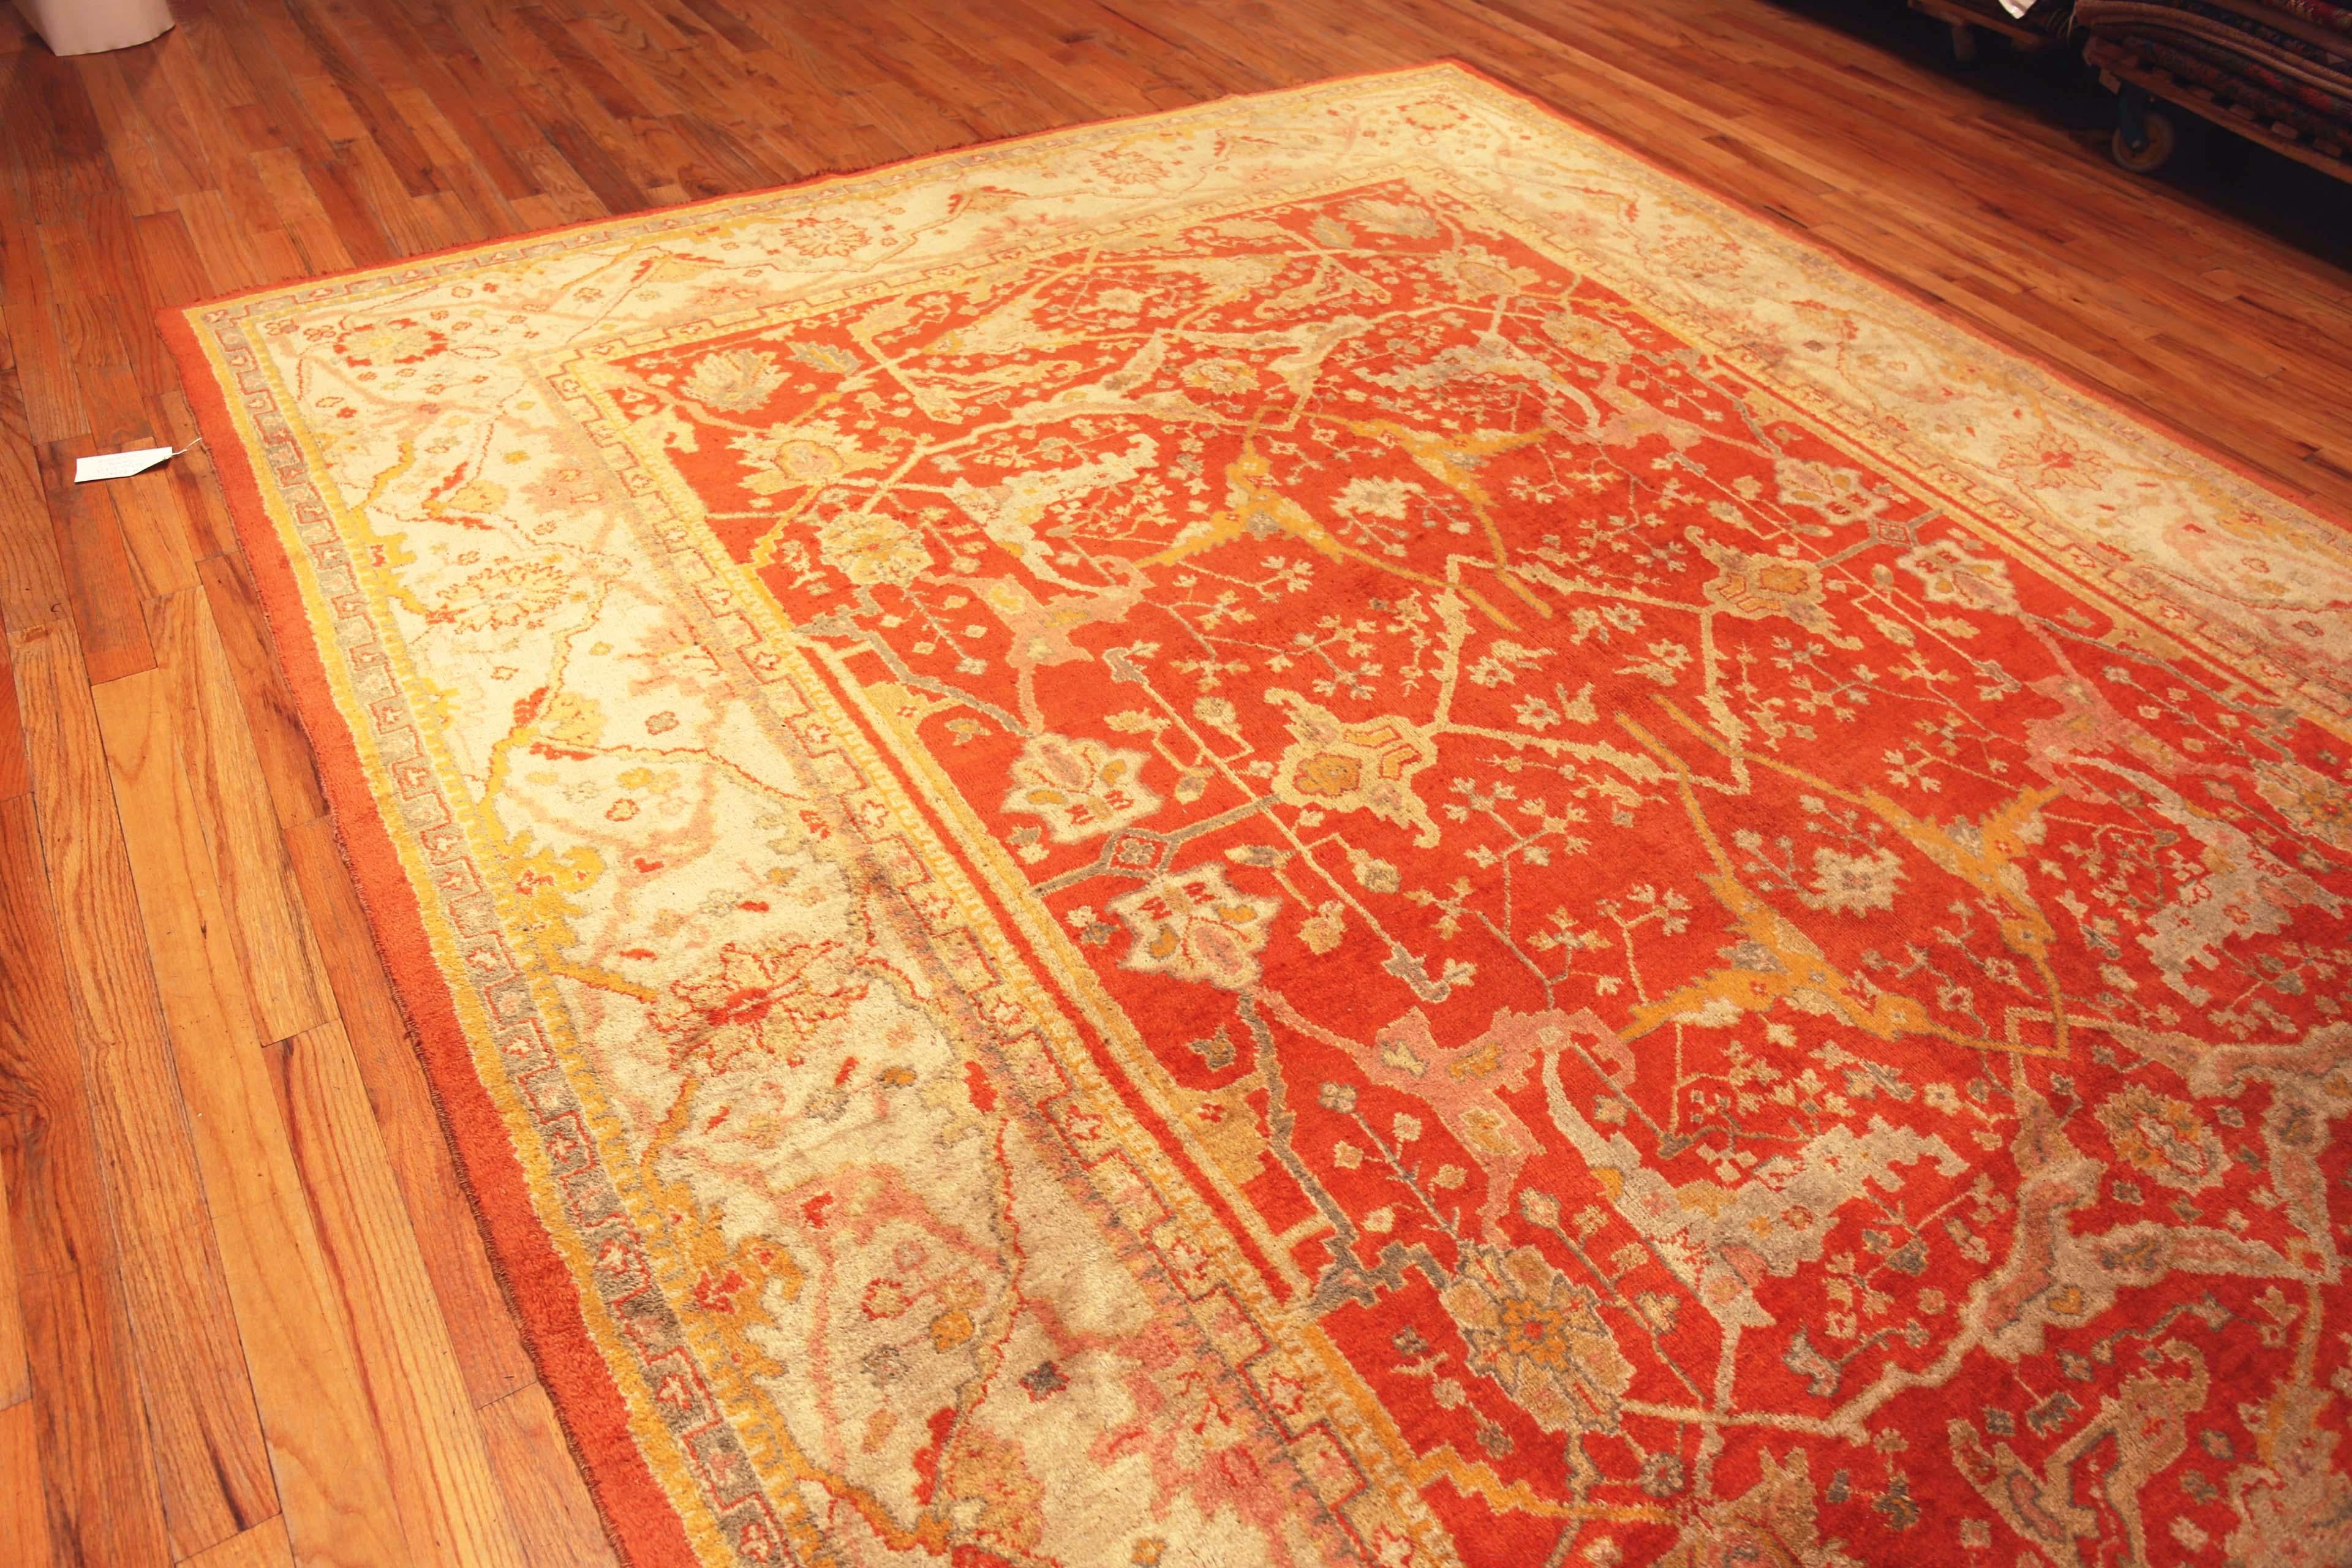 Decorative Antique Turkish Oushak Rug, Country of Origin: Turkey, Circa date: 1920. Size: 10 ft x 13 ft 3 in (3.05 m x 4.04 m)